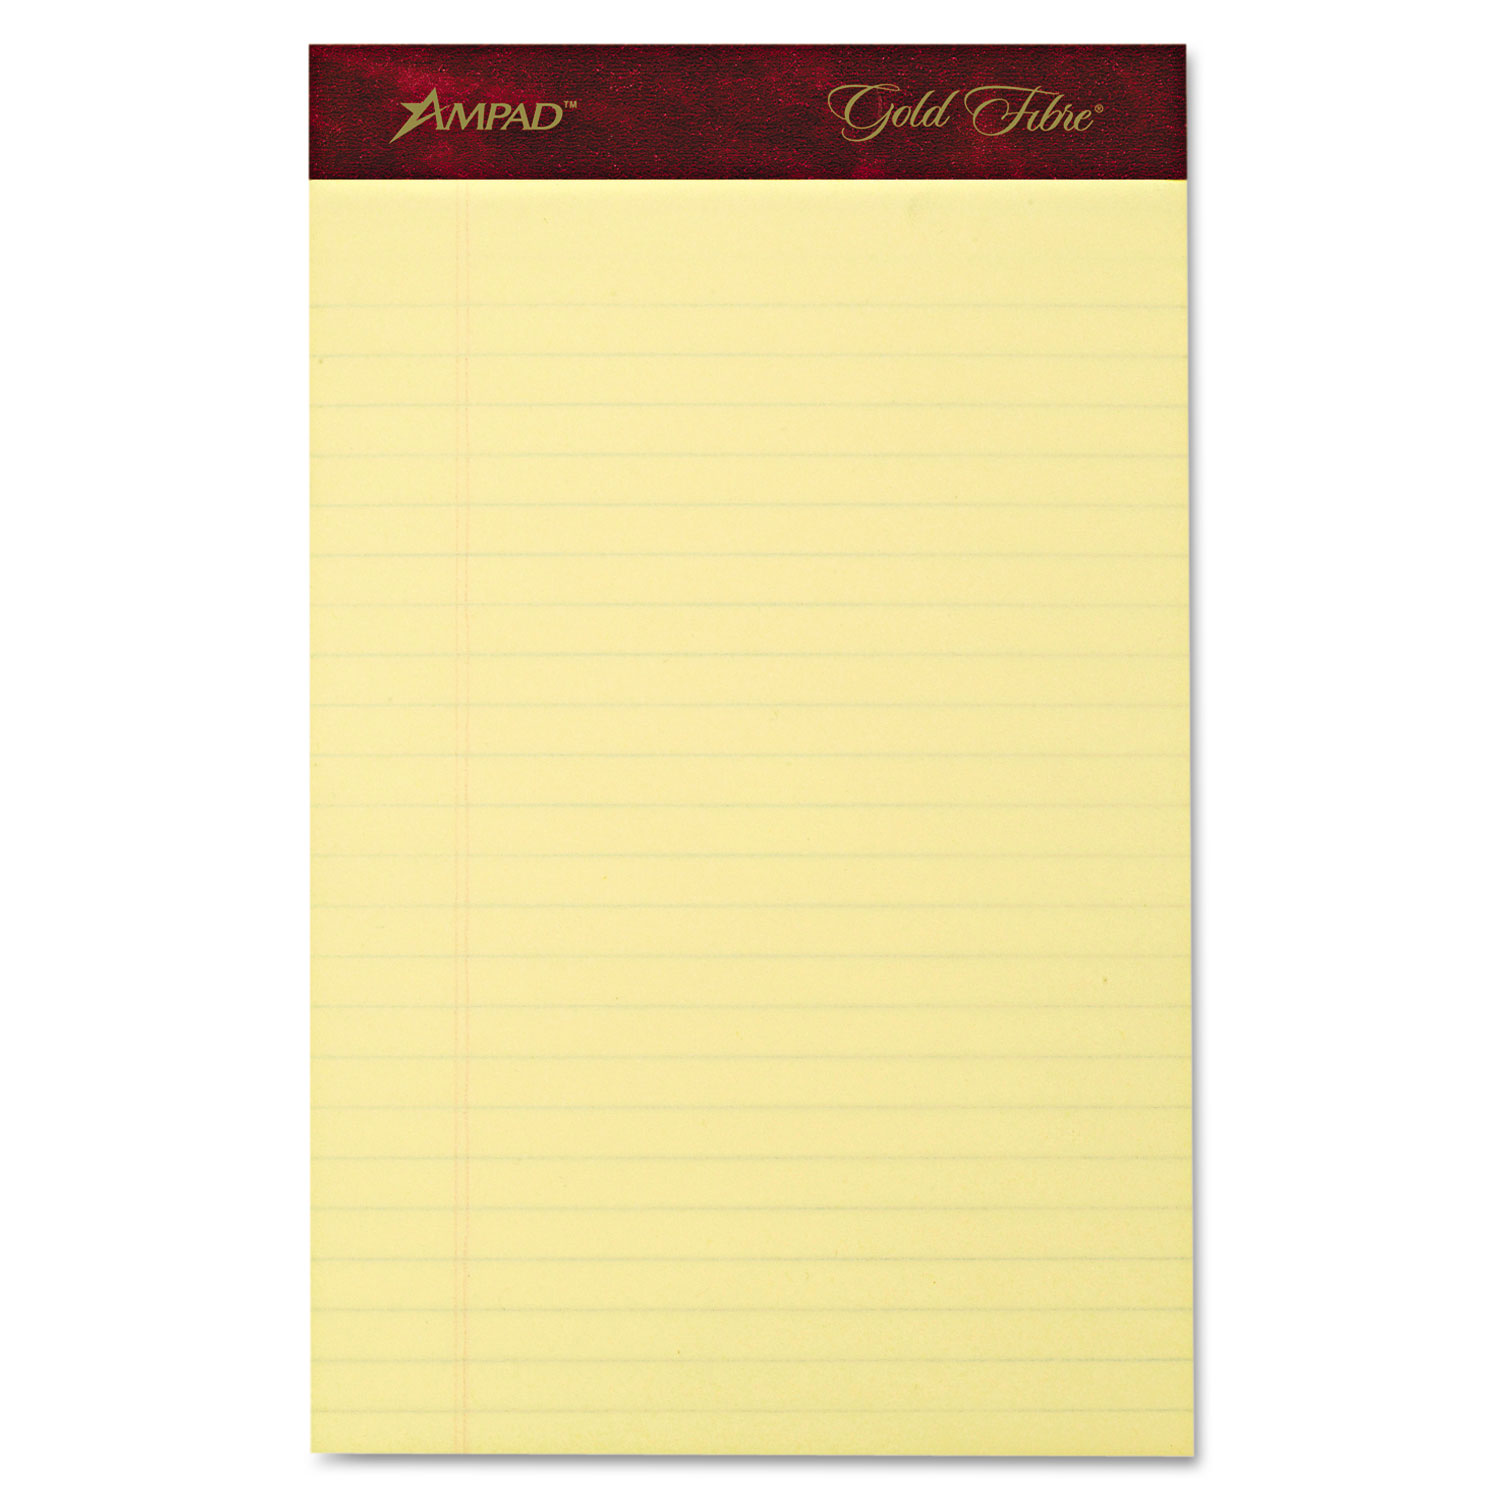  Ampad 20-029R Gold Fibre Writing Pads, Narrow Rule, 5 x 8, Canary, 50 Sheets, 4/Pack (TOP20029) 